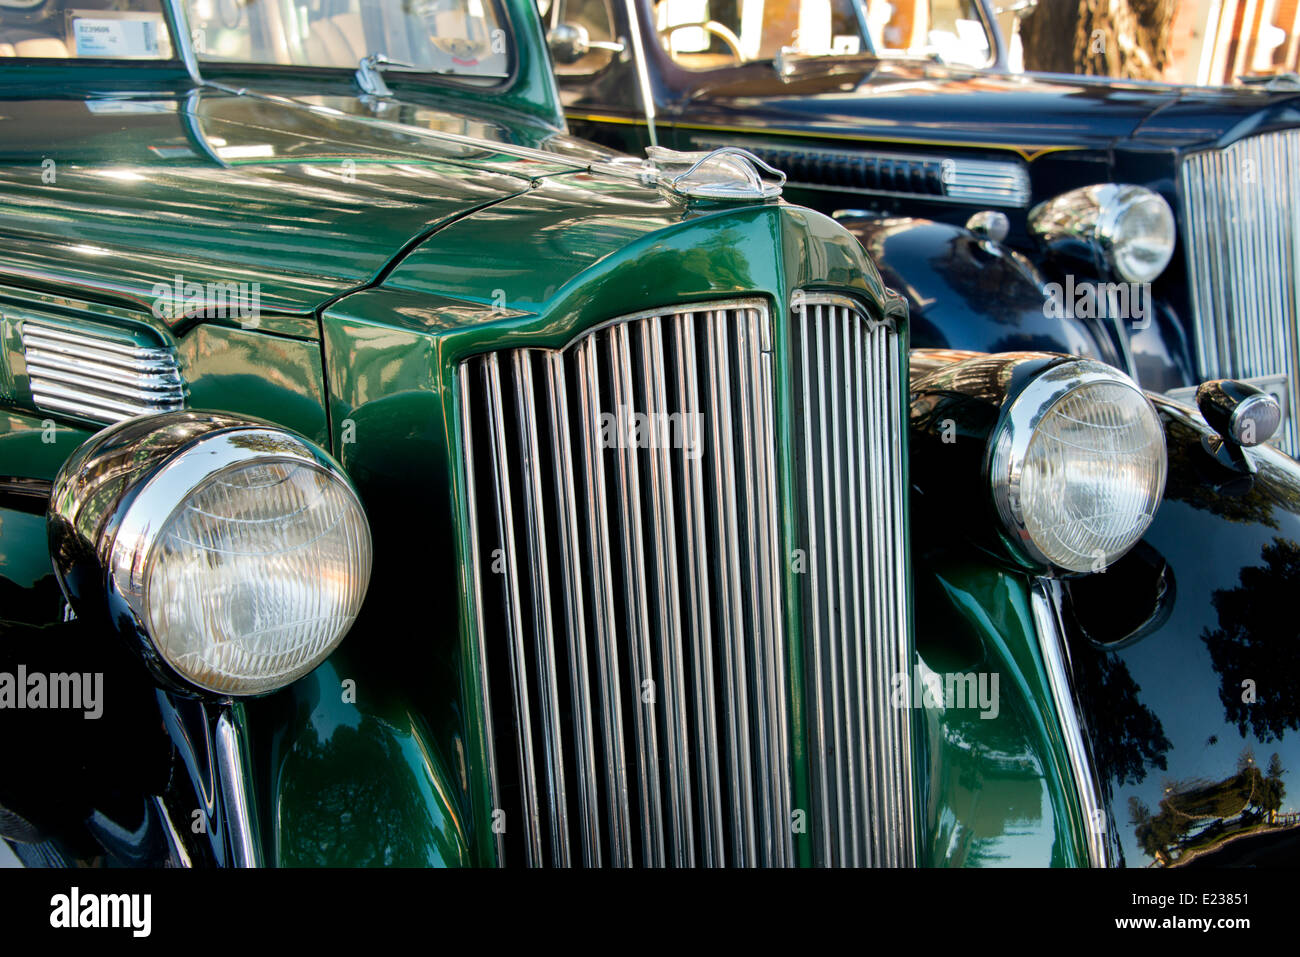 New Zealand, Napier. Detail of vintage Packard. Stock Photo